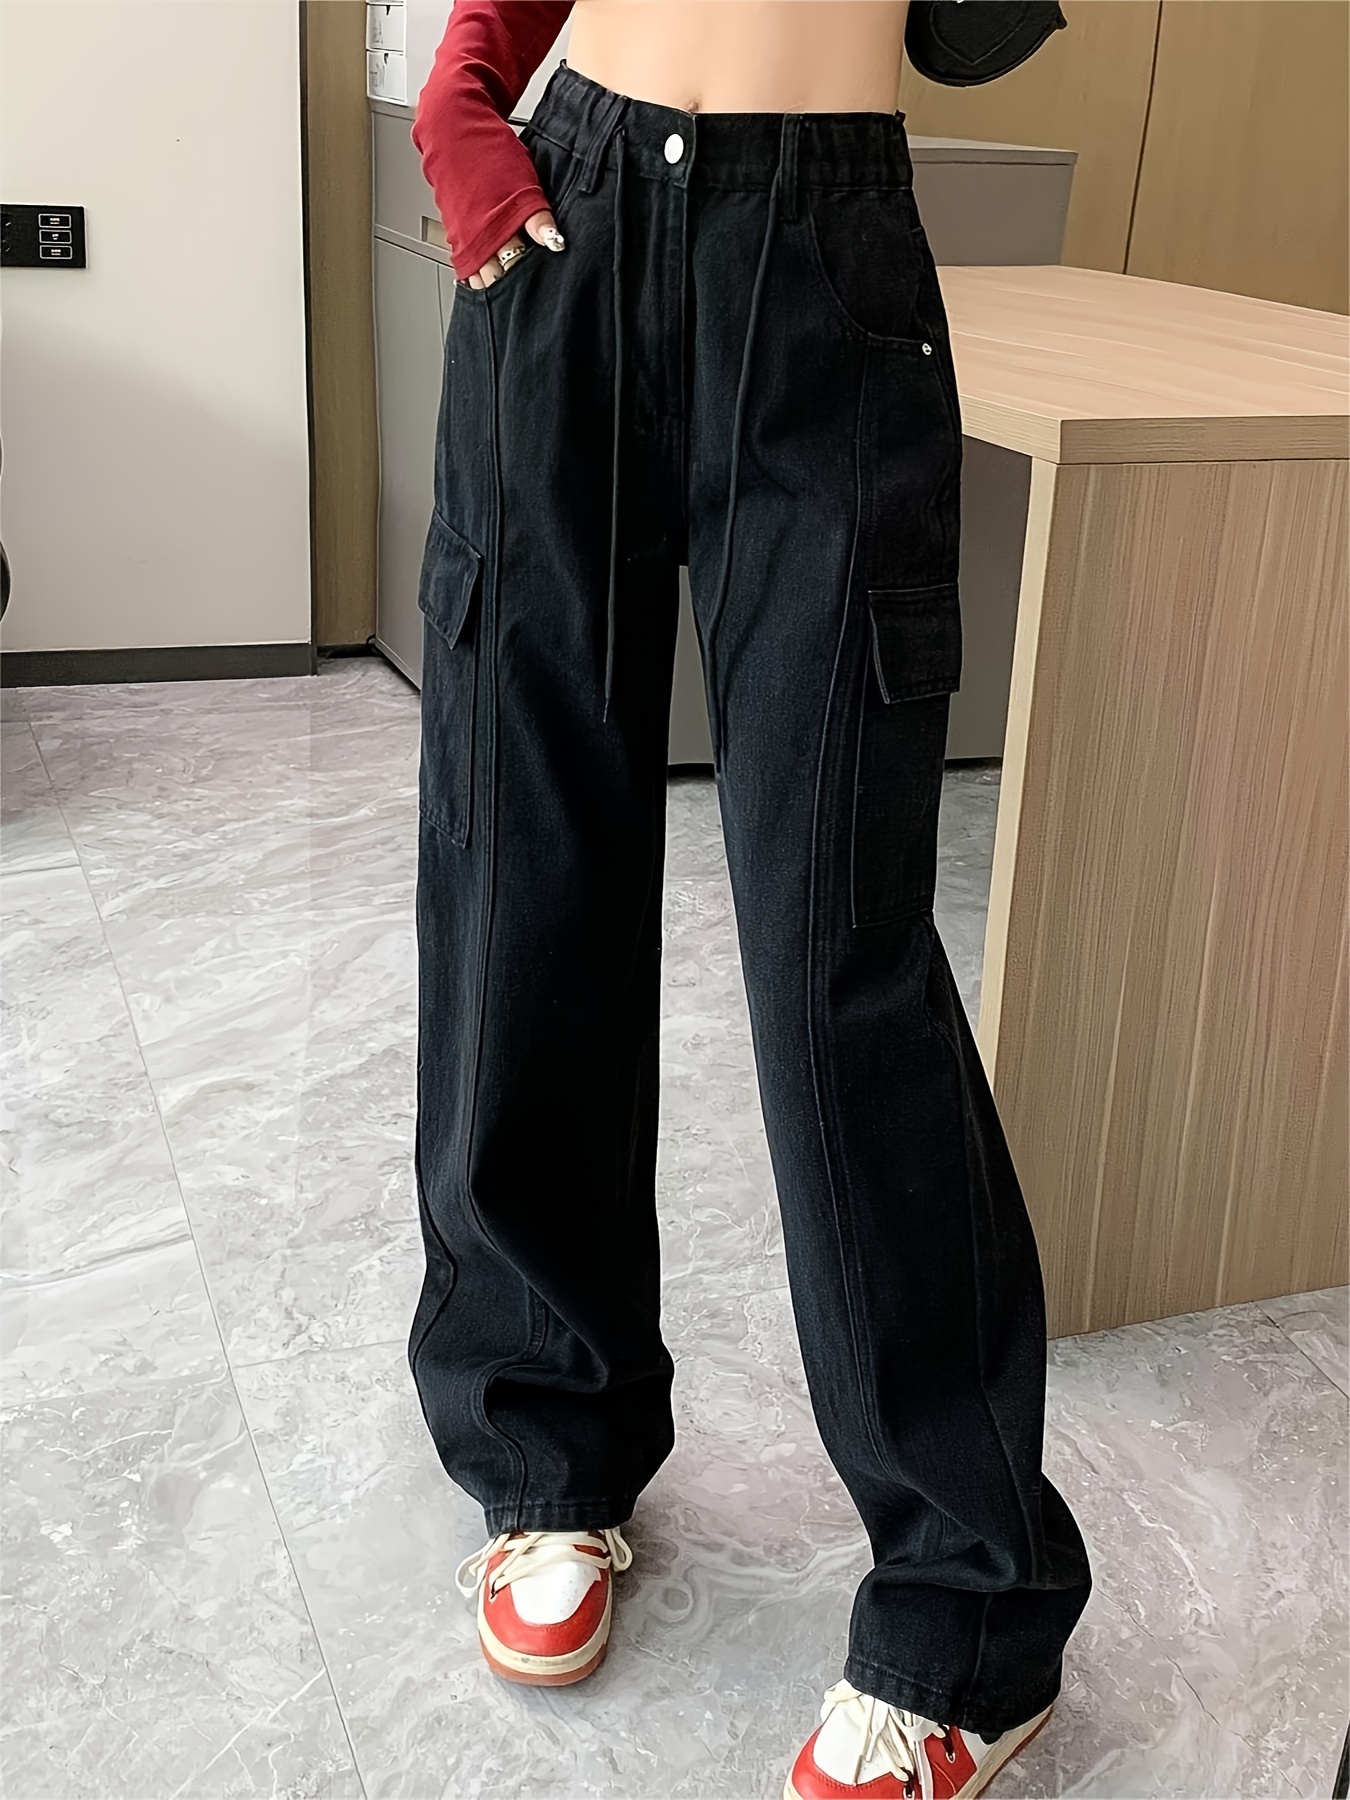 Casual Womens Baggy Cargo Joggers Pants Loose Elastic Multiple Pockets  Trousers